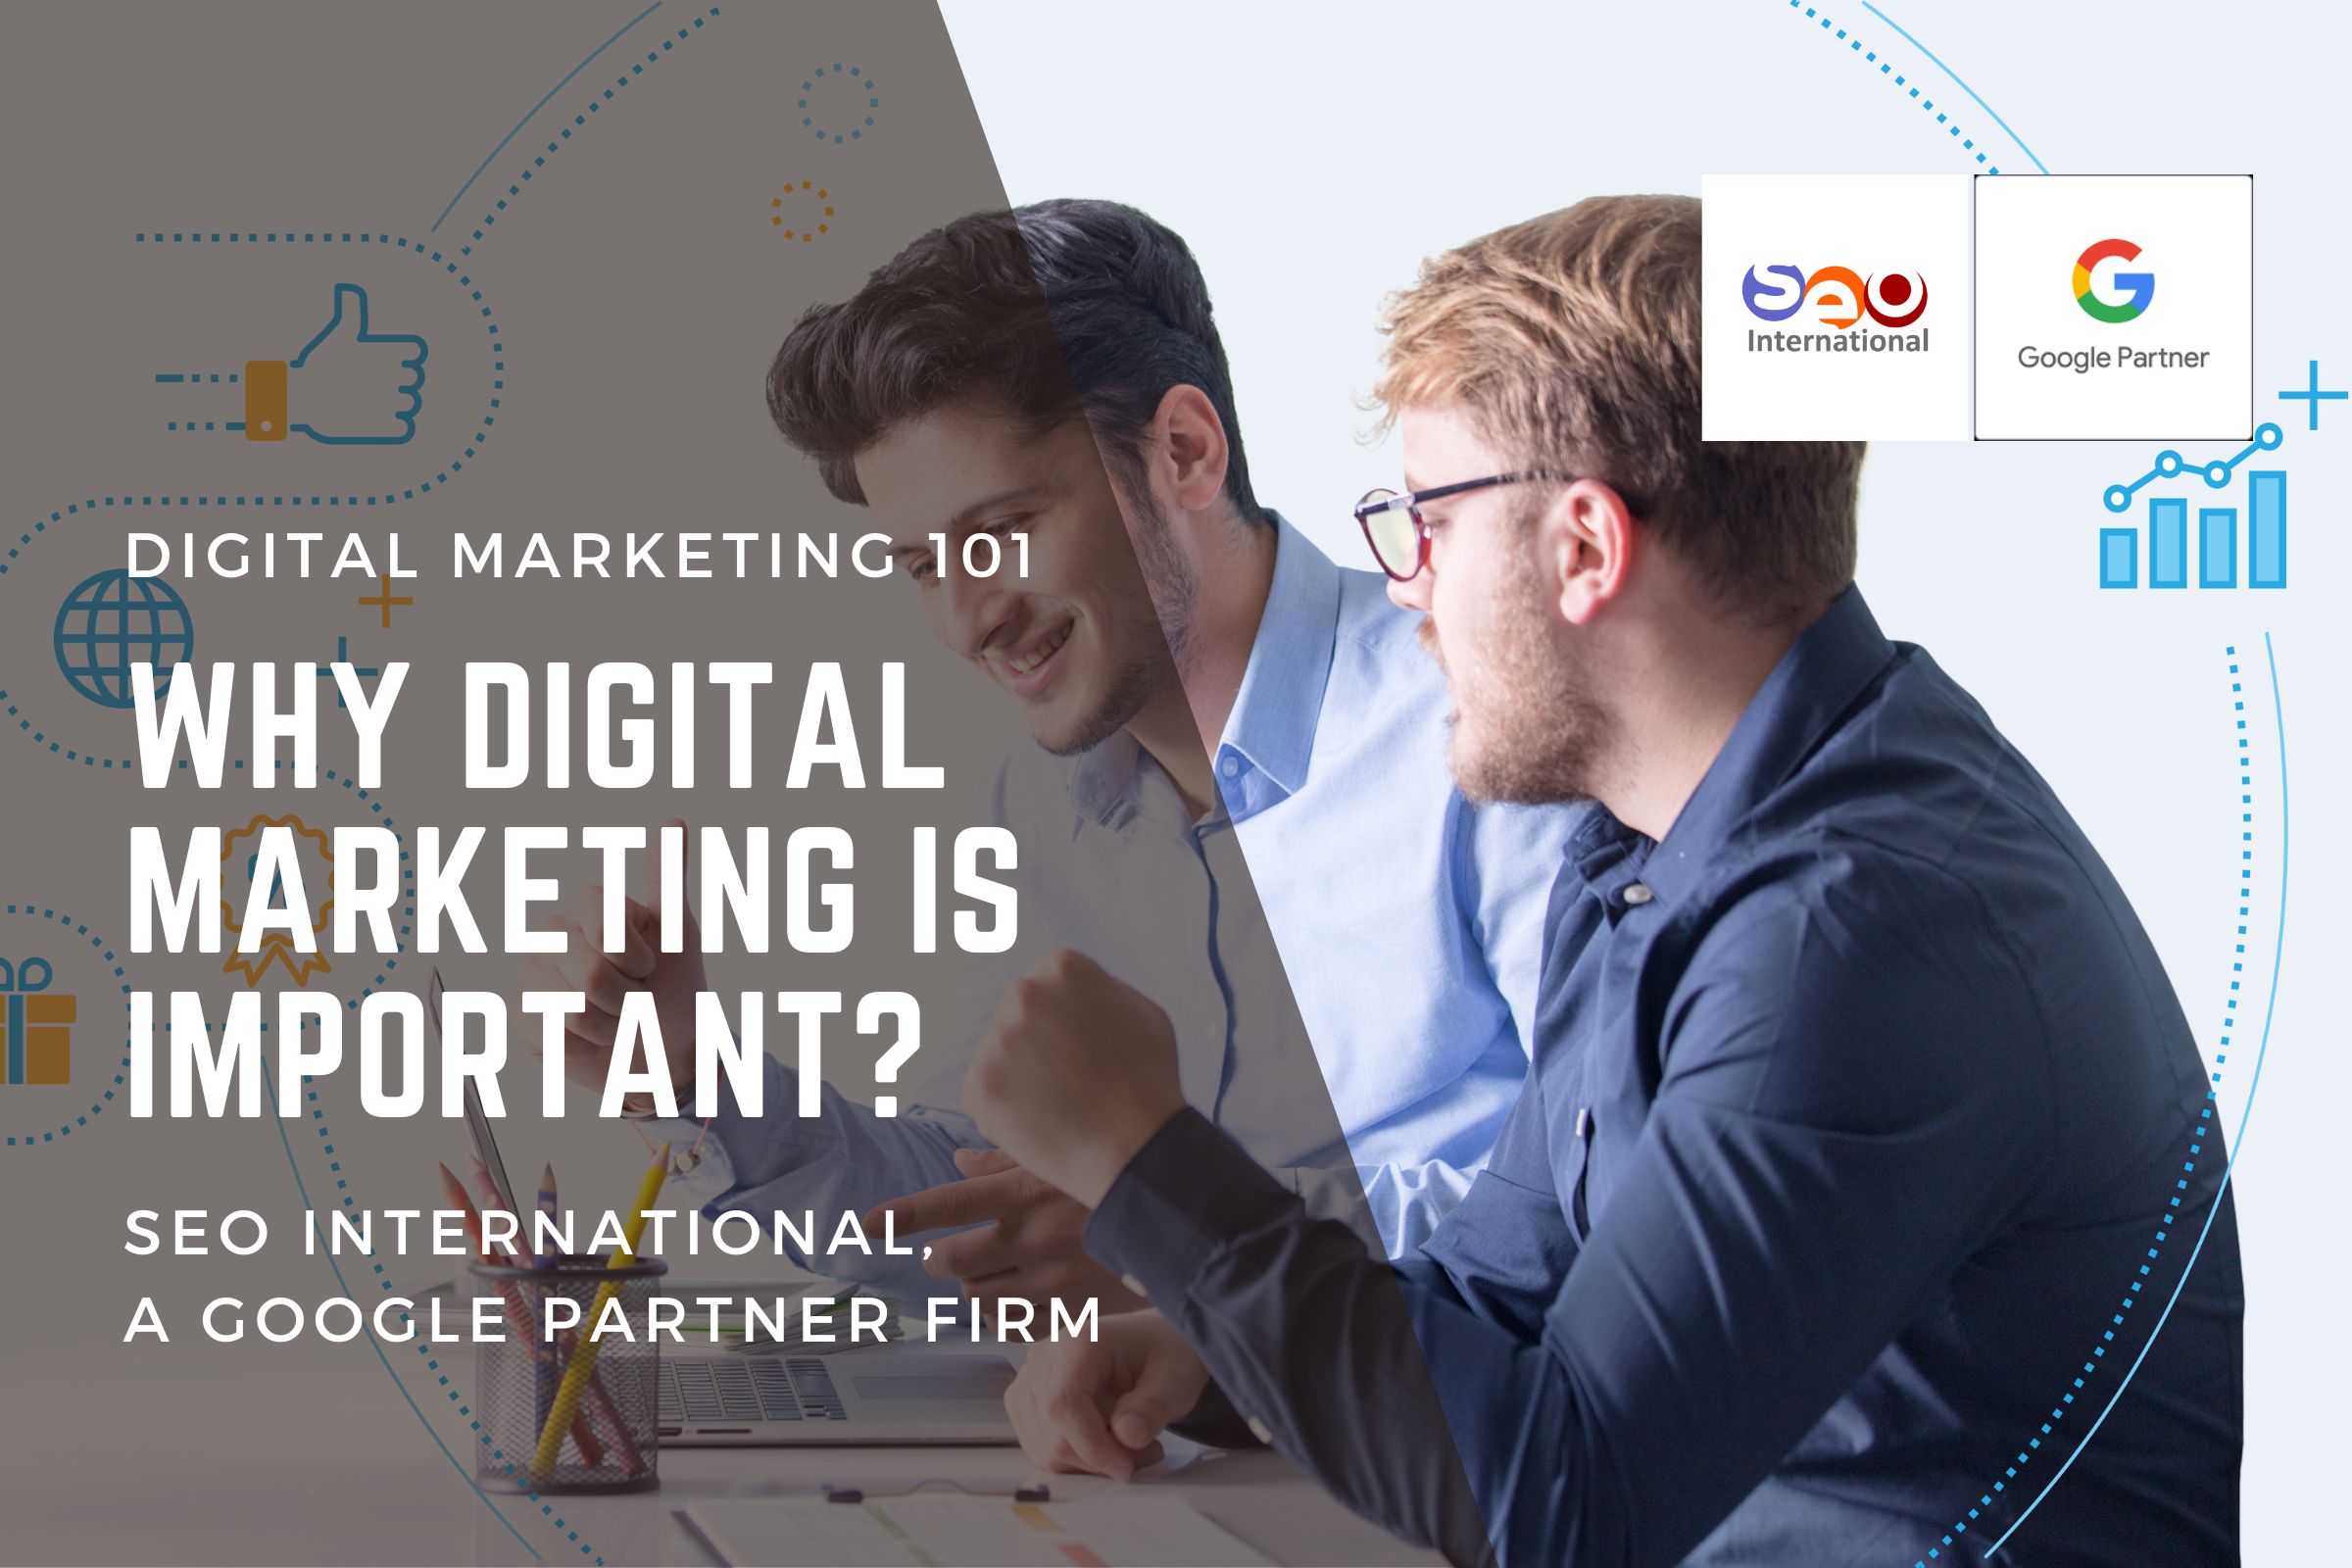 Why Digital Marketing is important?